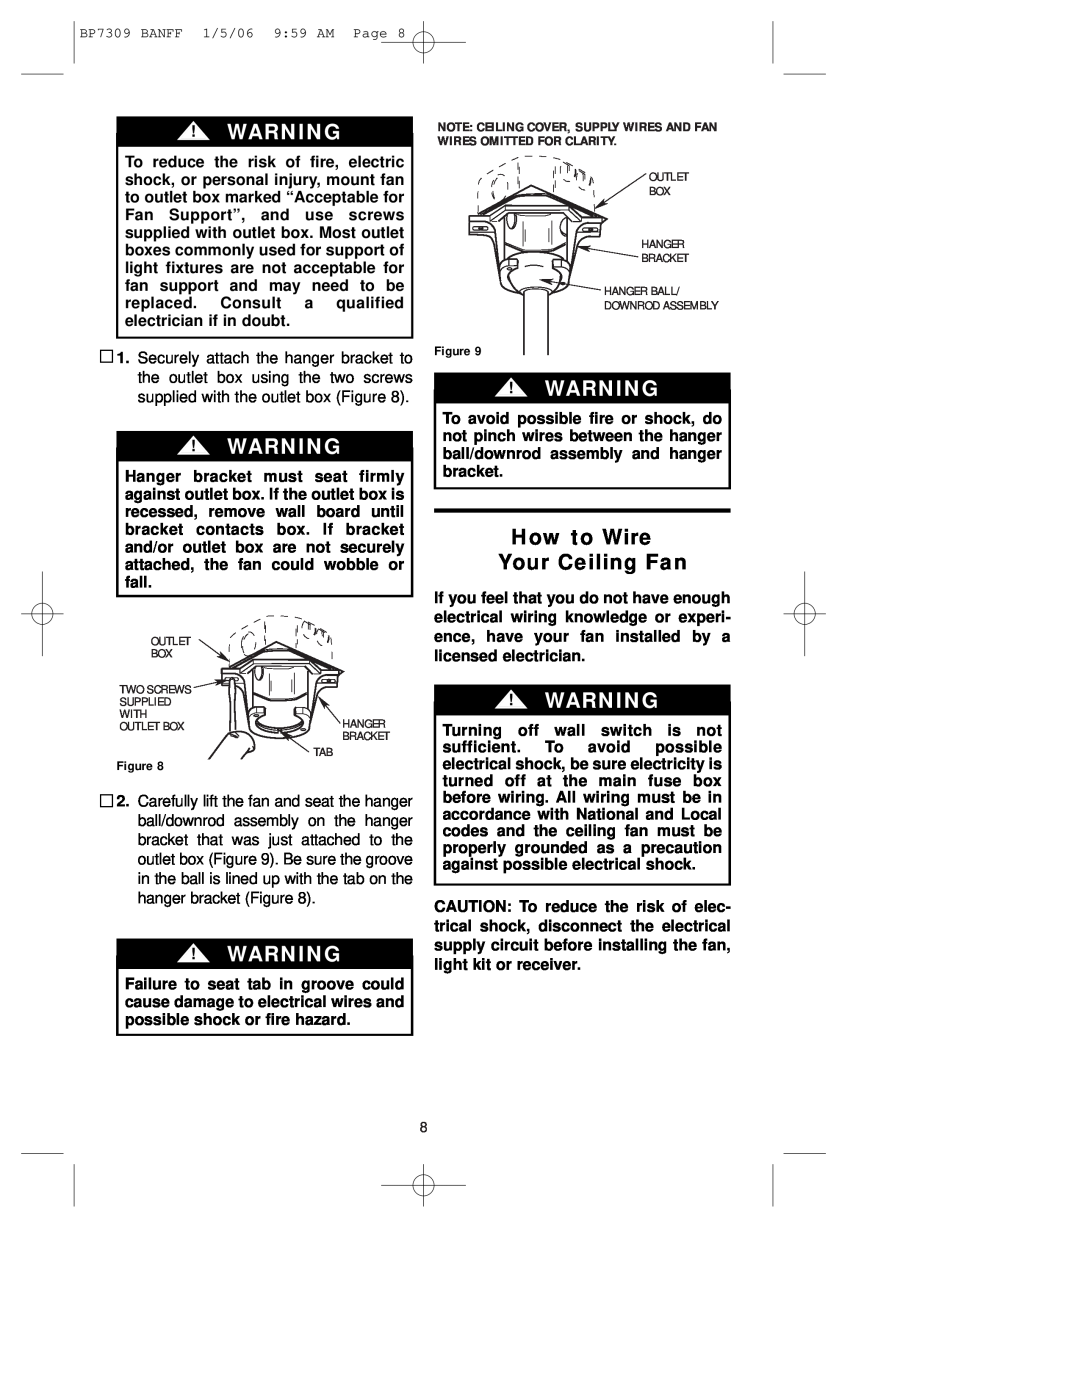 Emerson CF720PW00, CF720ORB00, CF720WB00 owner manual How to Wire Your Ceiling Fan 